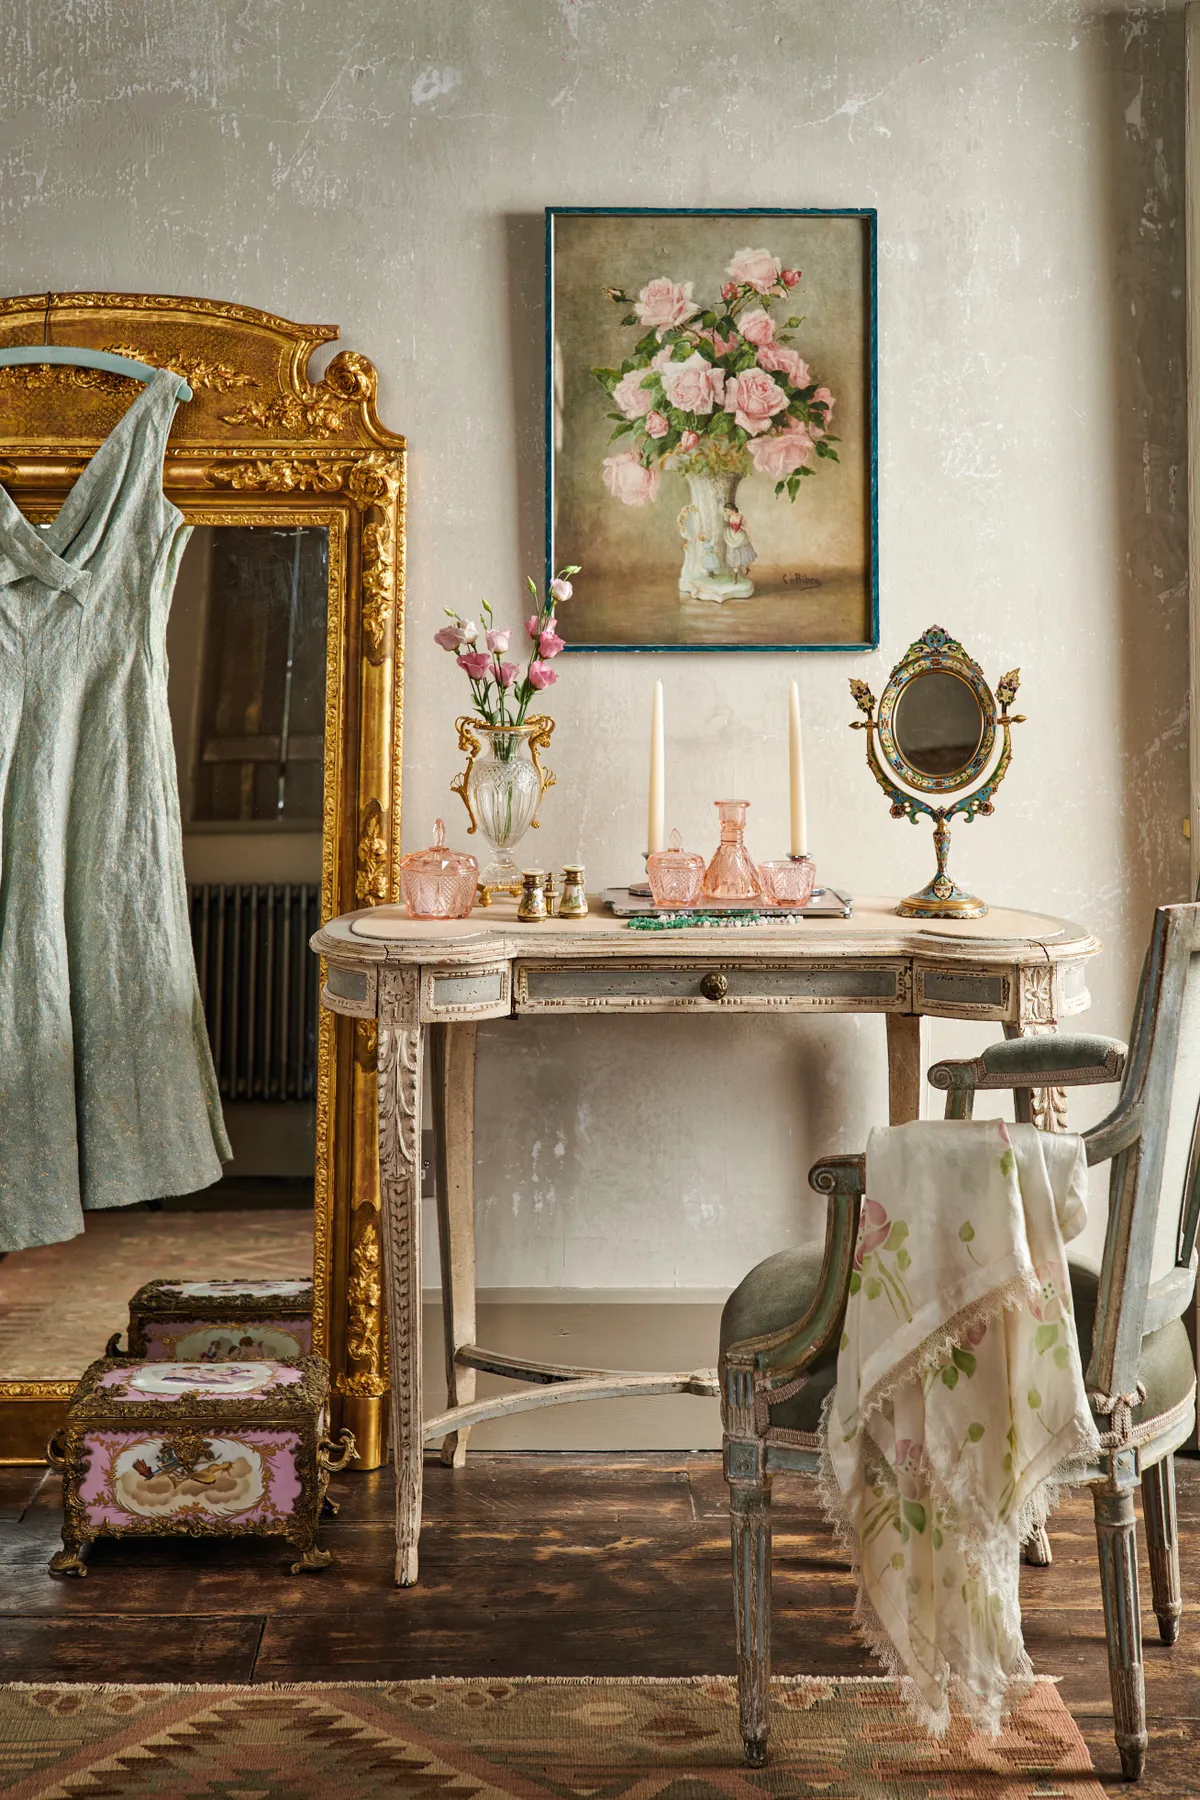 A romantic dressing table topped with pink glassware and a gilt hand mirror.